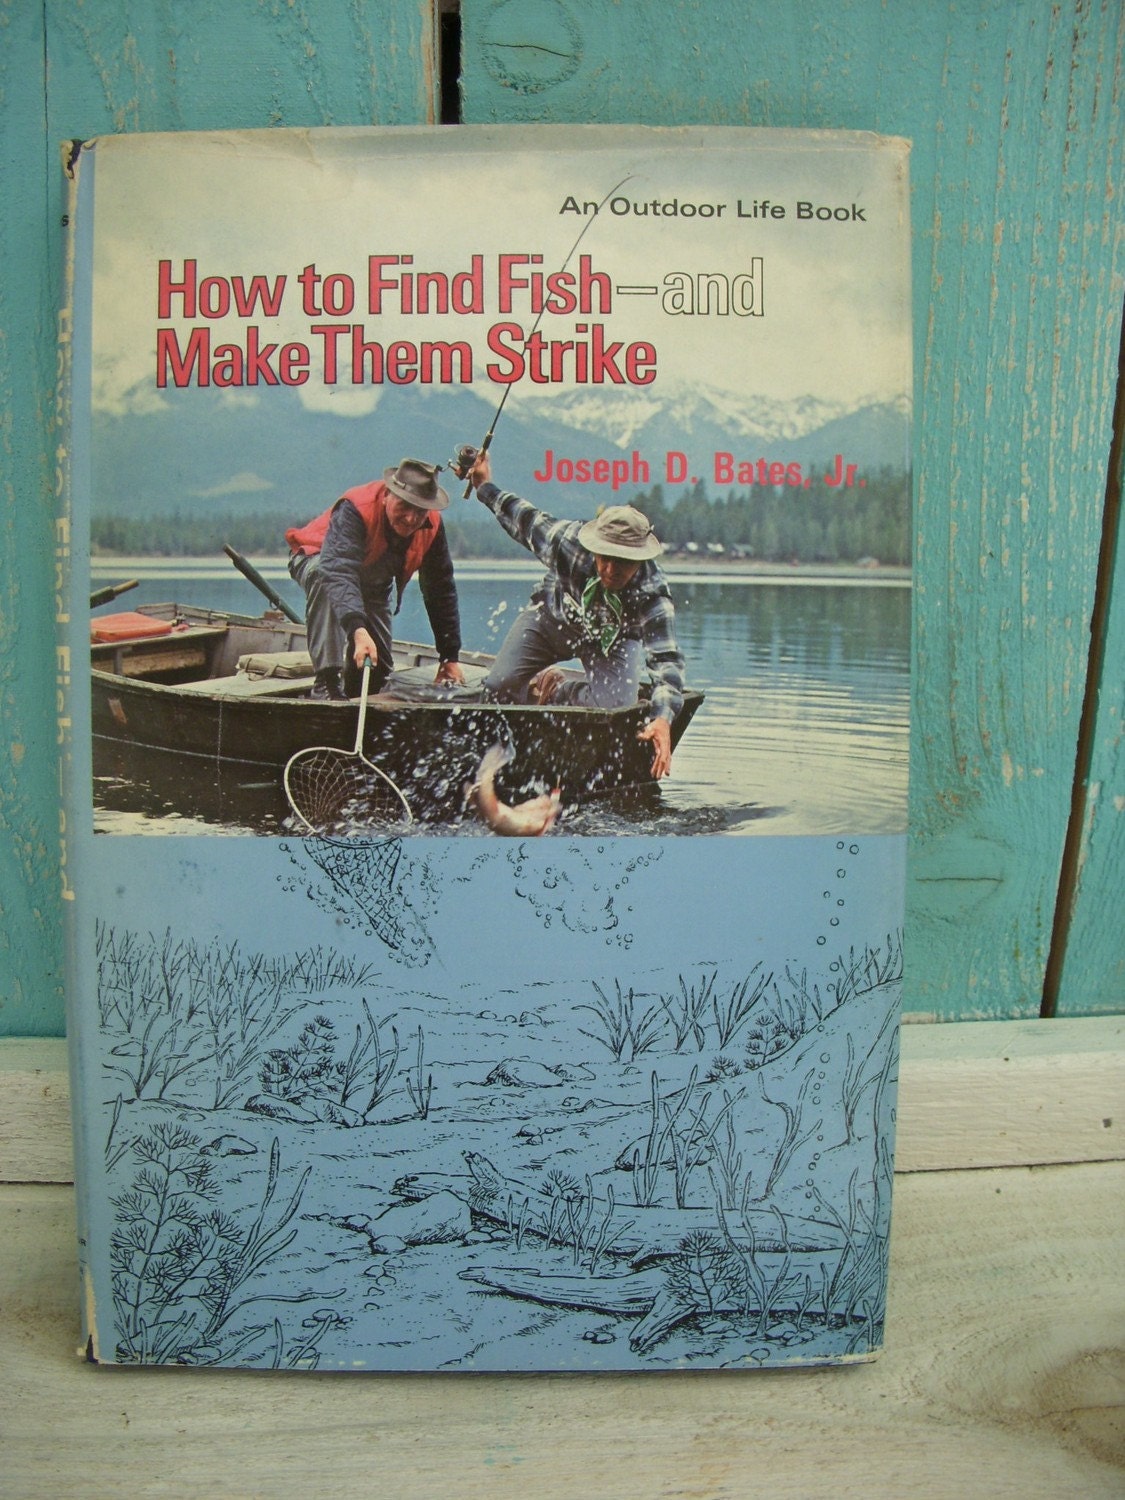 How to Find Fish and Make Them Strike Joseph D. Bates